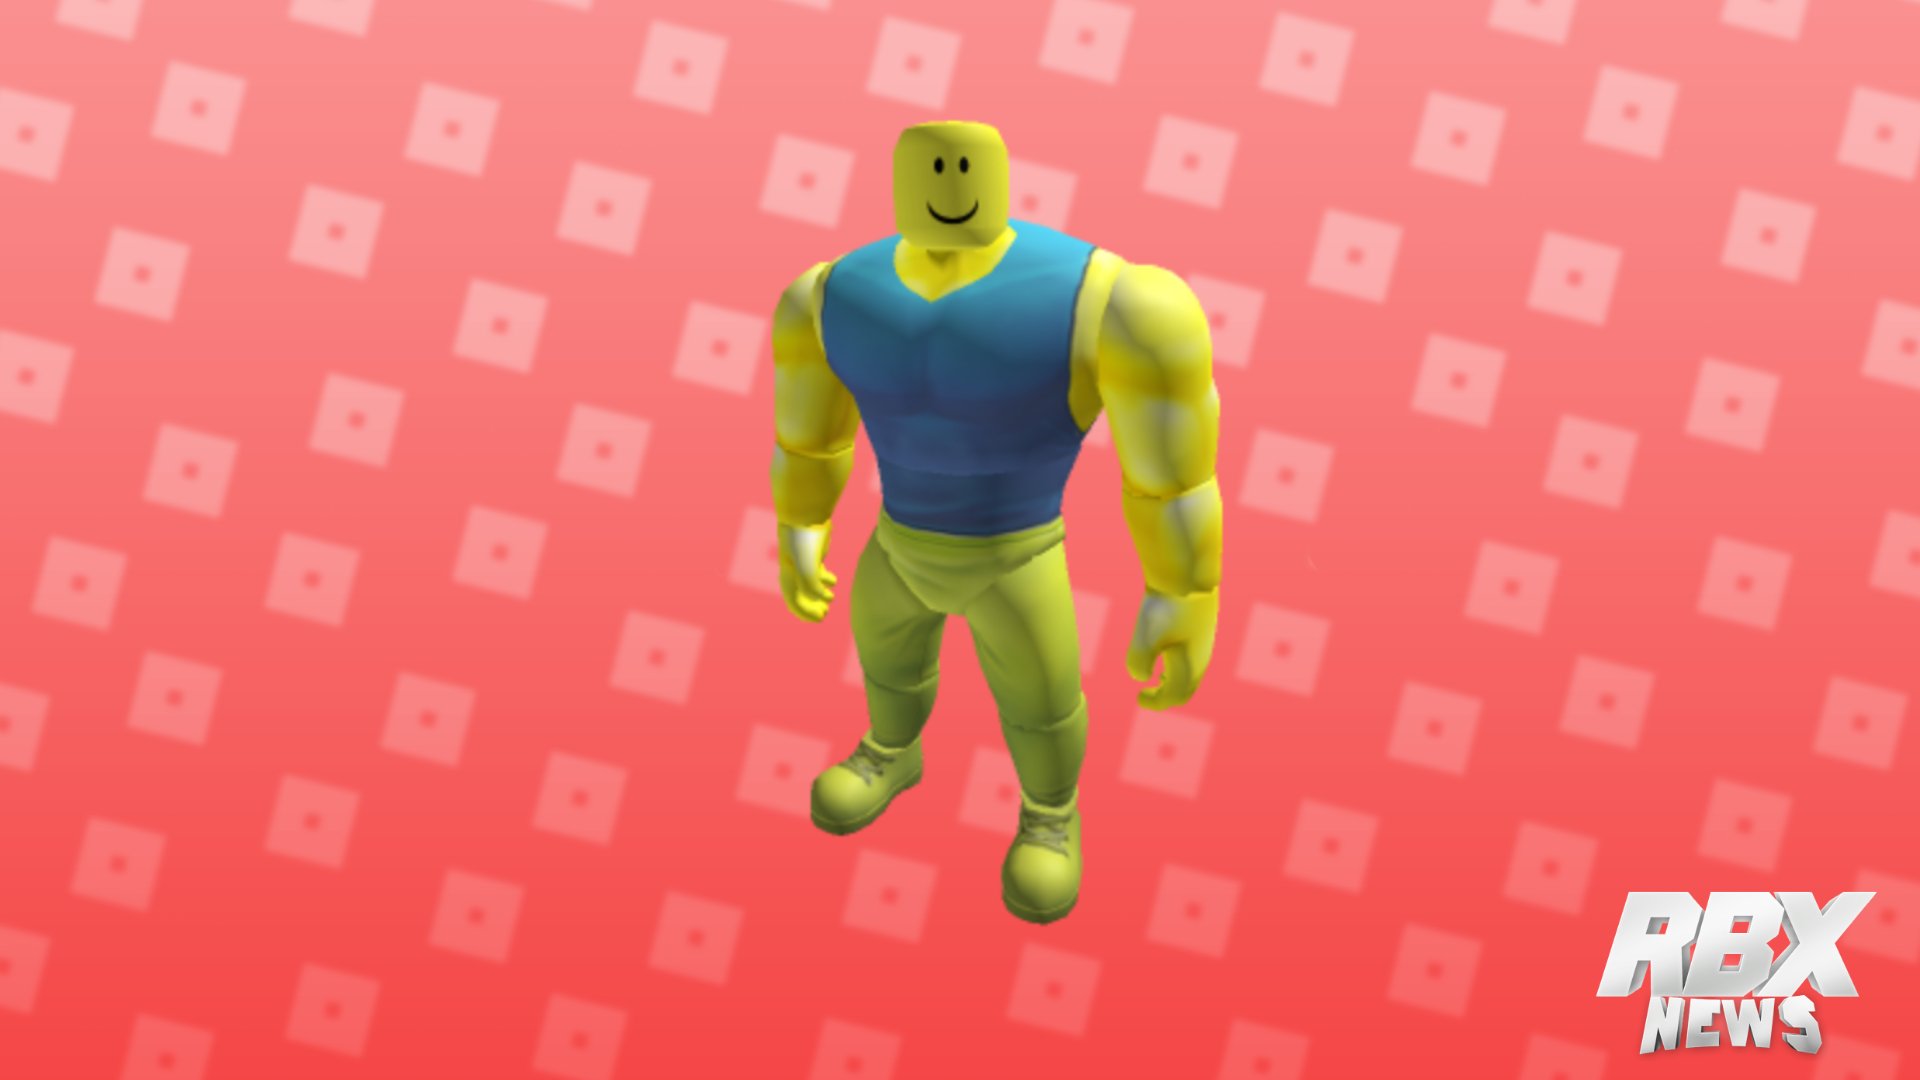 RBXNews on X: Introducing the #Roblox Buffnoob which you may